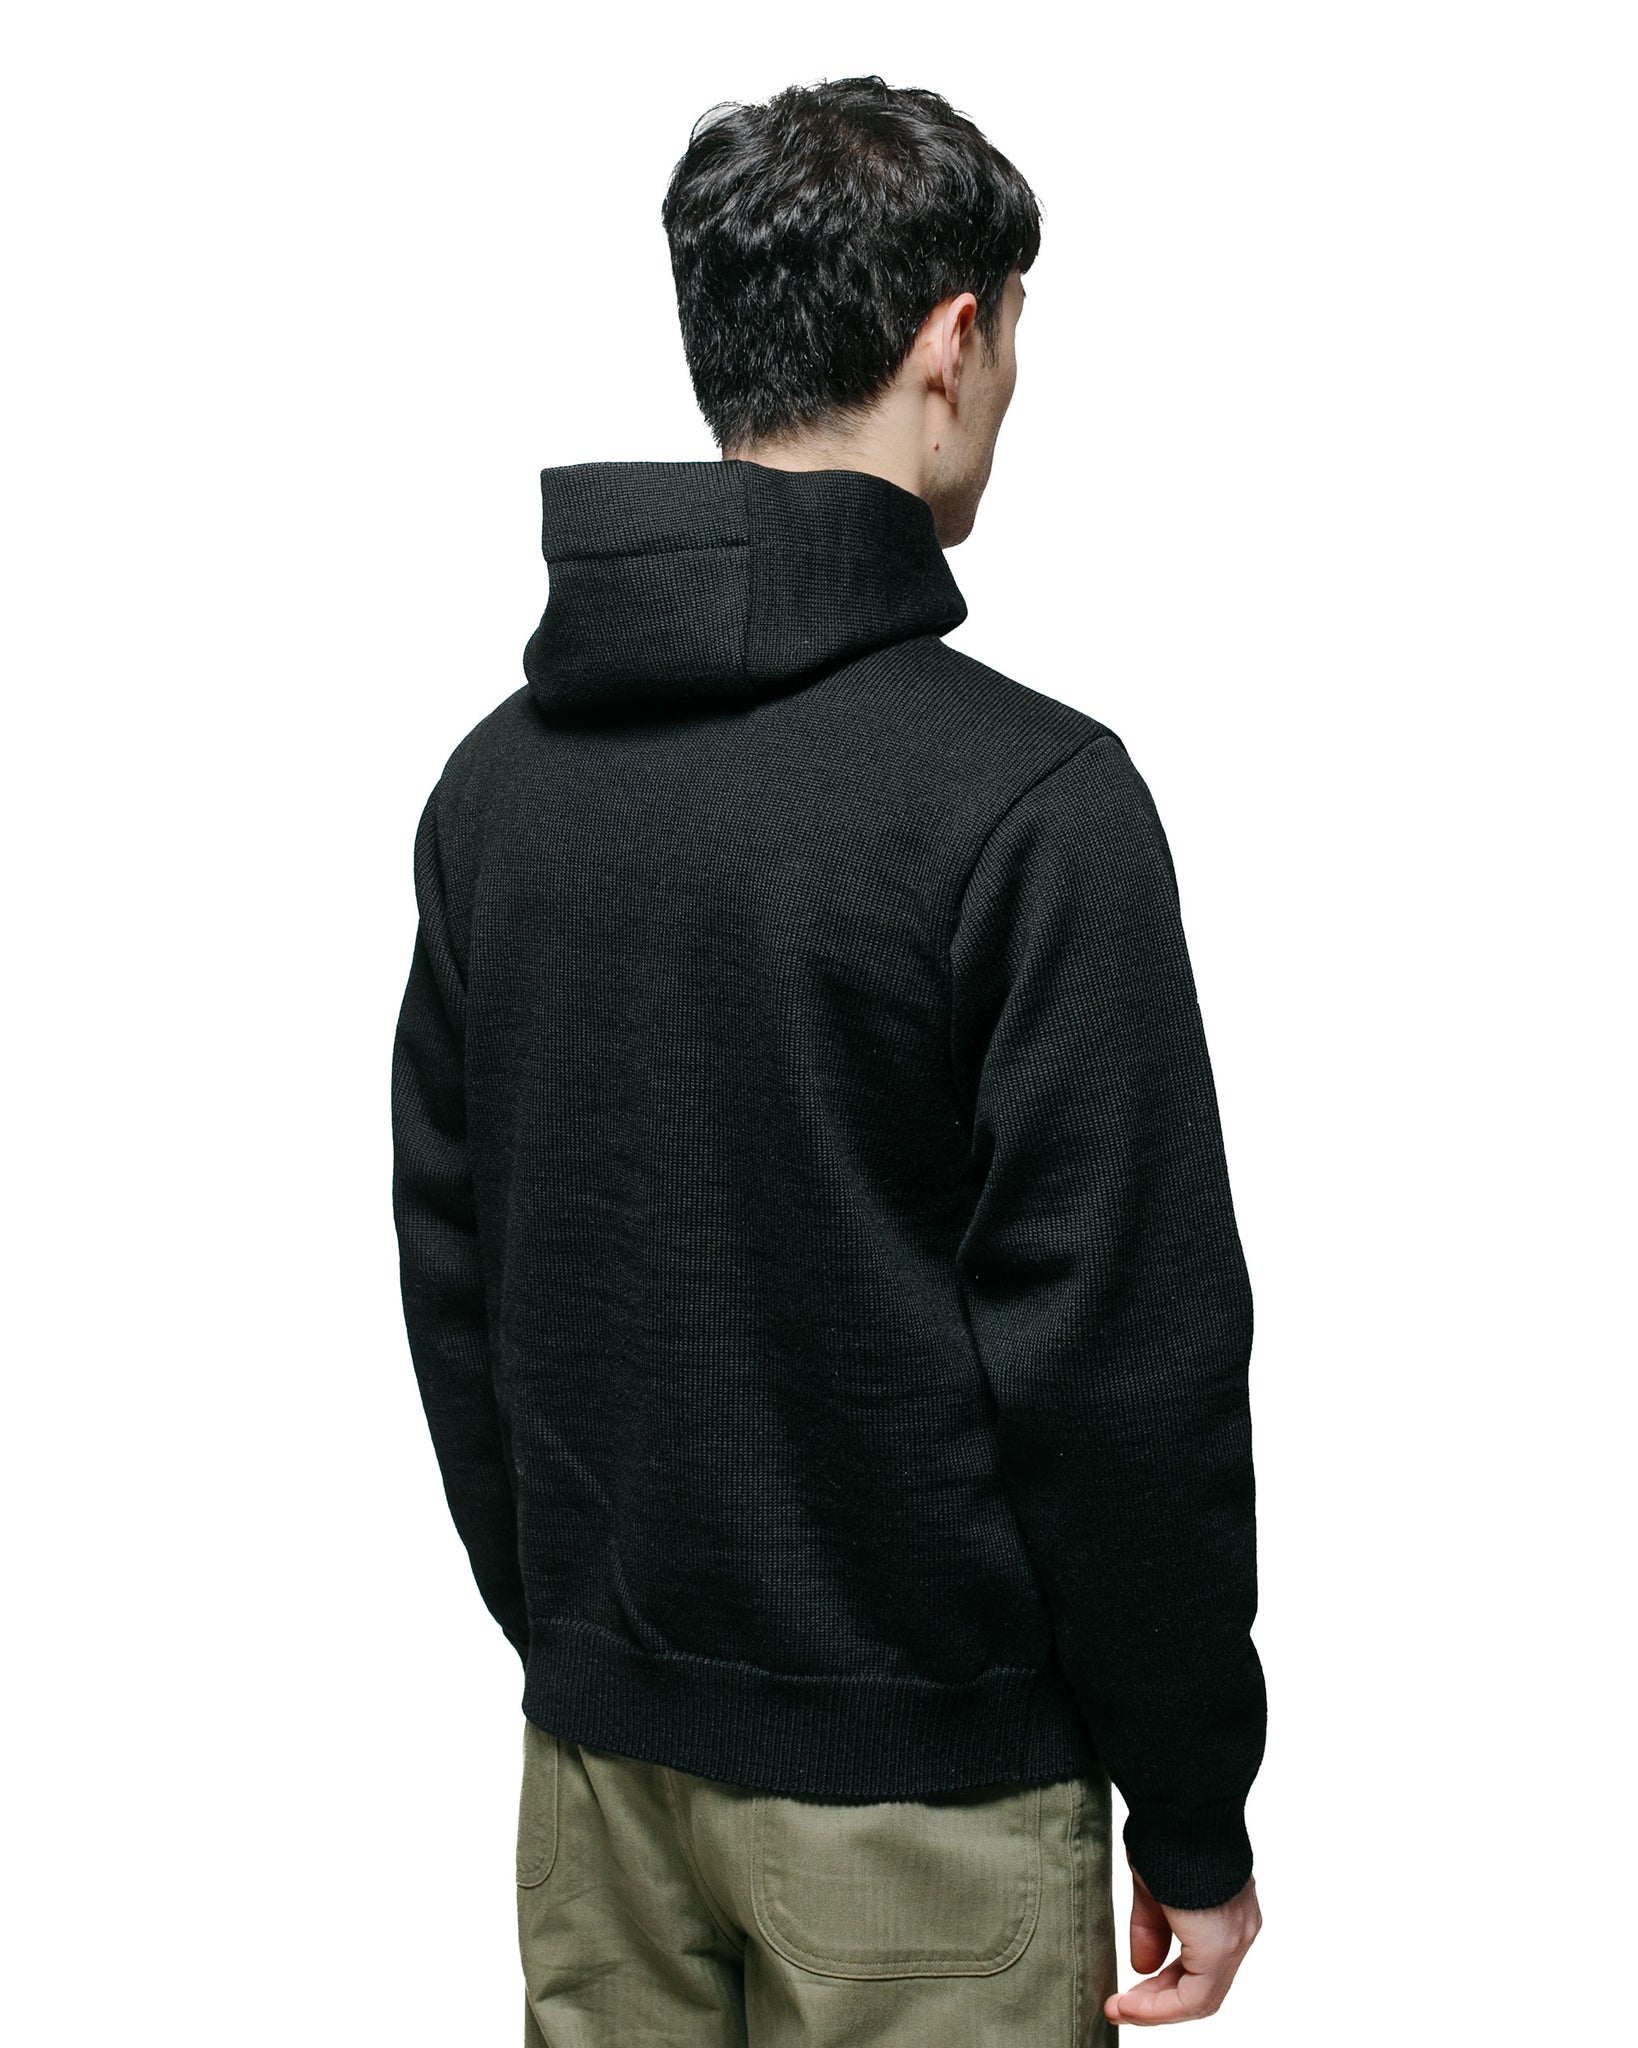 The Real McCoy's MC23107 30s Hooded Knit Sweater Black model back